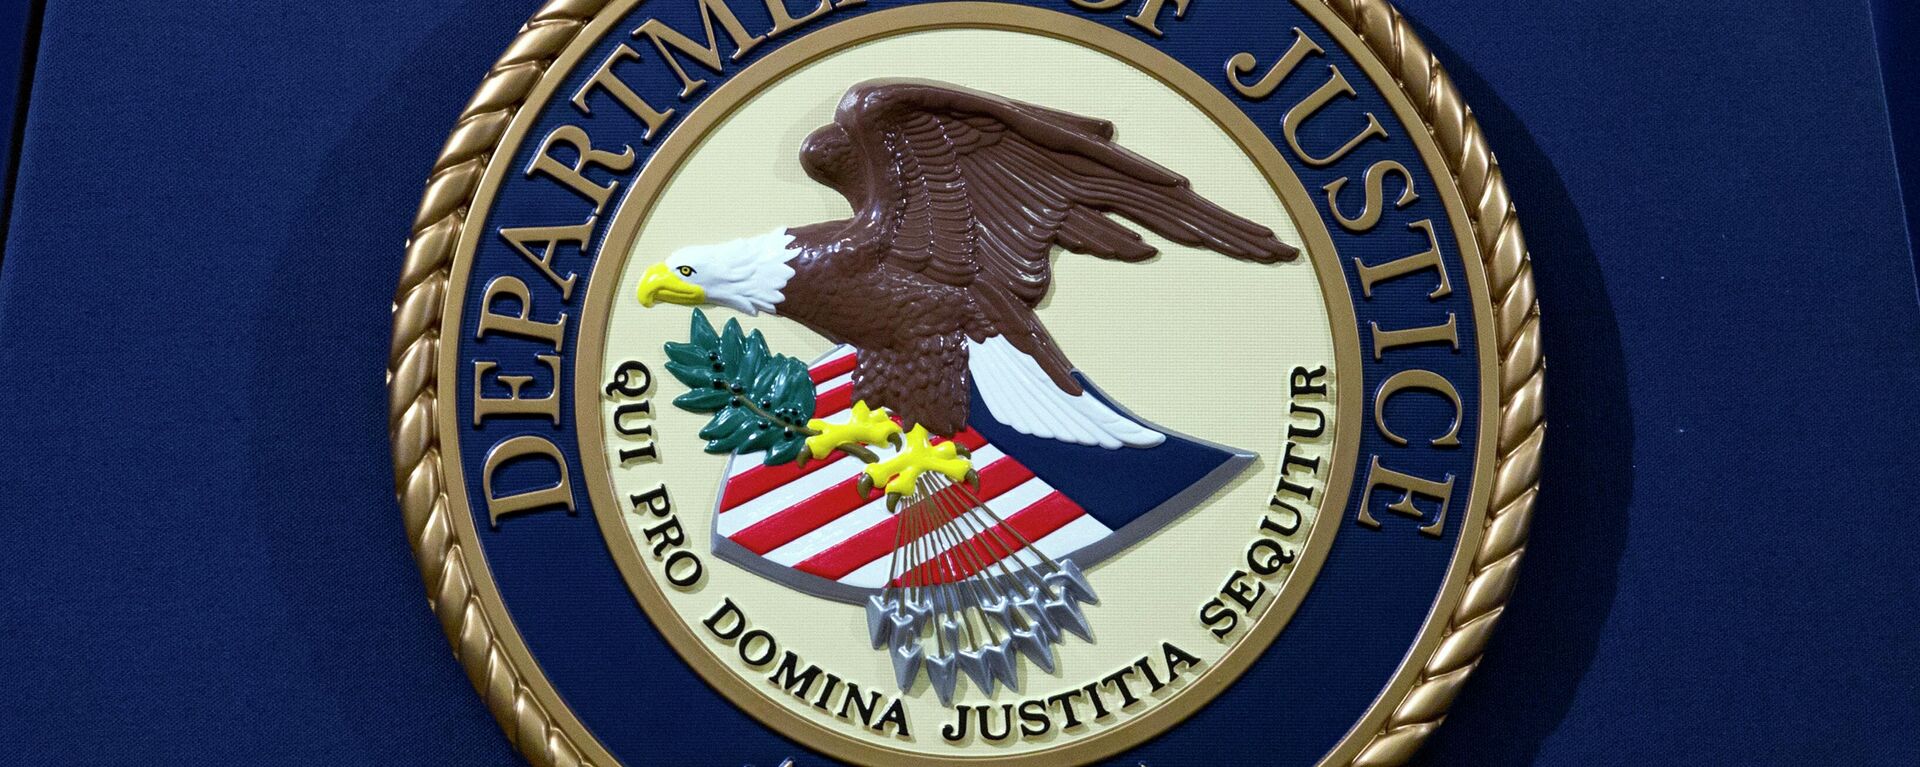 FILE - In this Nov. 28, 2018, file photo, the Department of Justice seal is seen in Washington, D.C. The Justice Department has released a new regulation spelling out detailed nationwide requirements for sex offender registration under a law Congress passed in 2006. The regulation released Monday stems from the Sex Offender Registration and Notification Act. It requires convicted sex offenders to register in the states in which they live, work or attend school.  (AP Photo/Jose Luis Magana, File) - Sputnik International, 1920, 19.08.2022